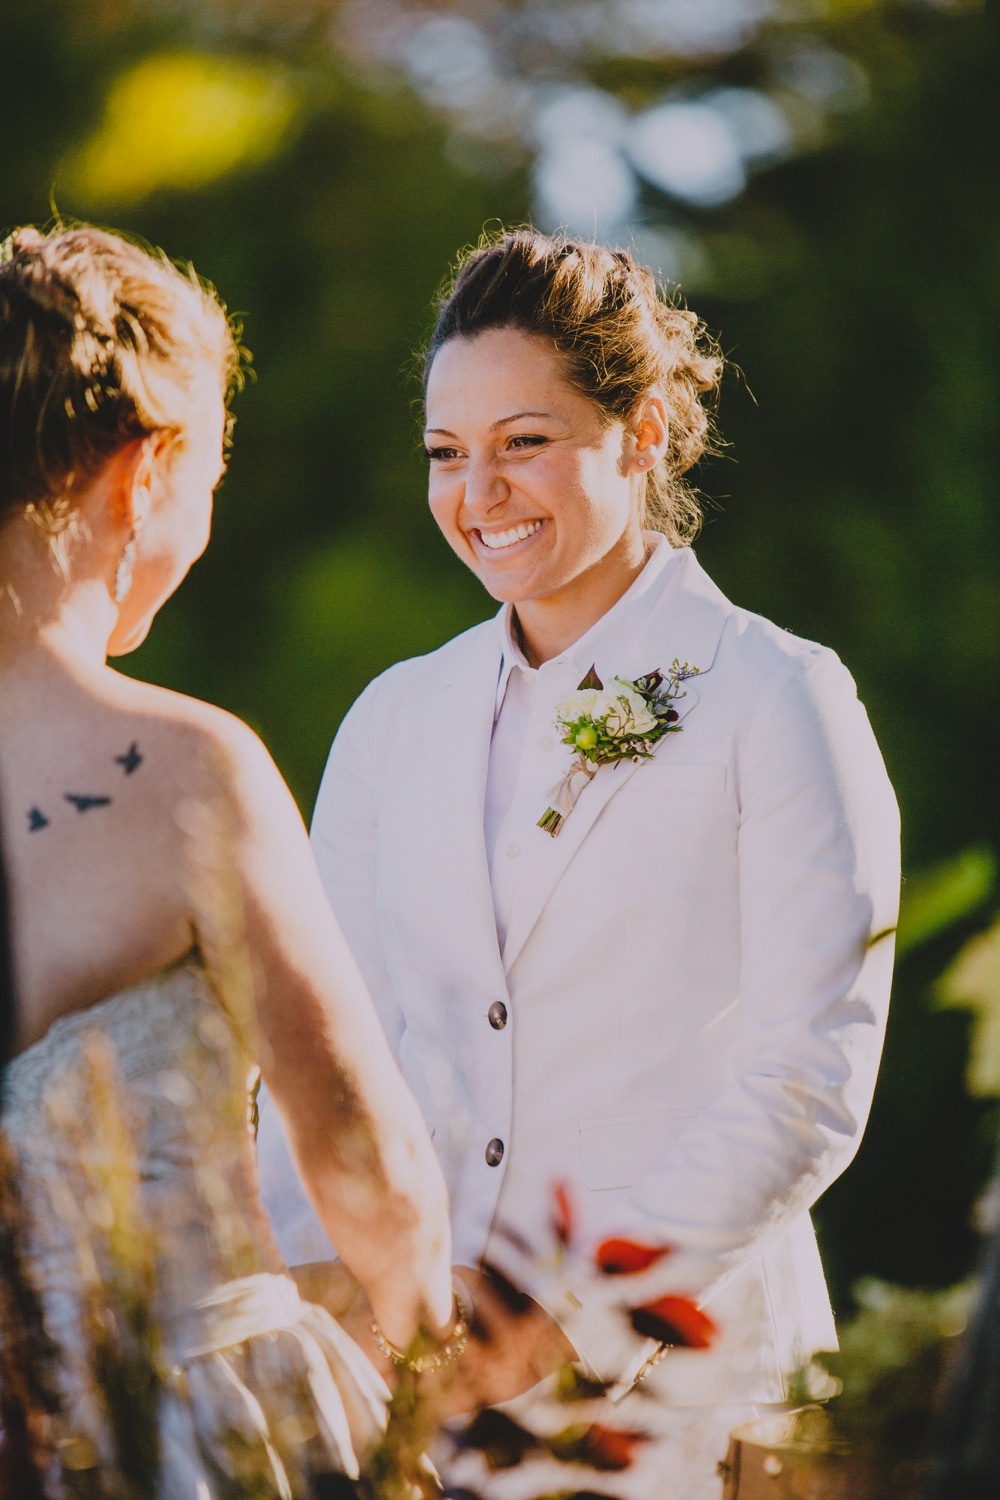 A documentary photograph of a bride smiling at her bride during their rustic fall outdoor wedding ceremony at Kitz Farm in New Hampshire